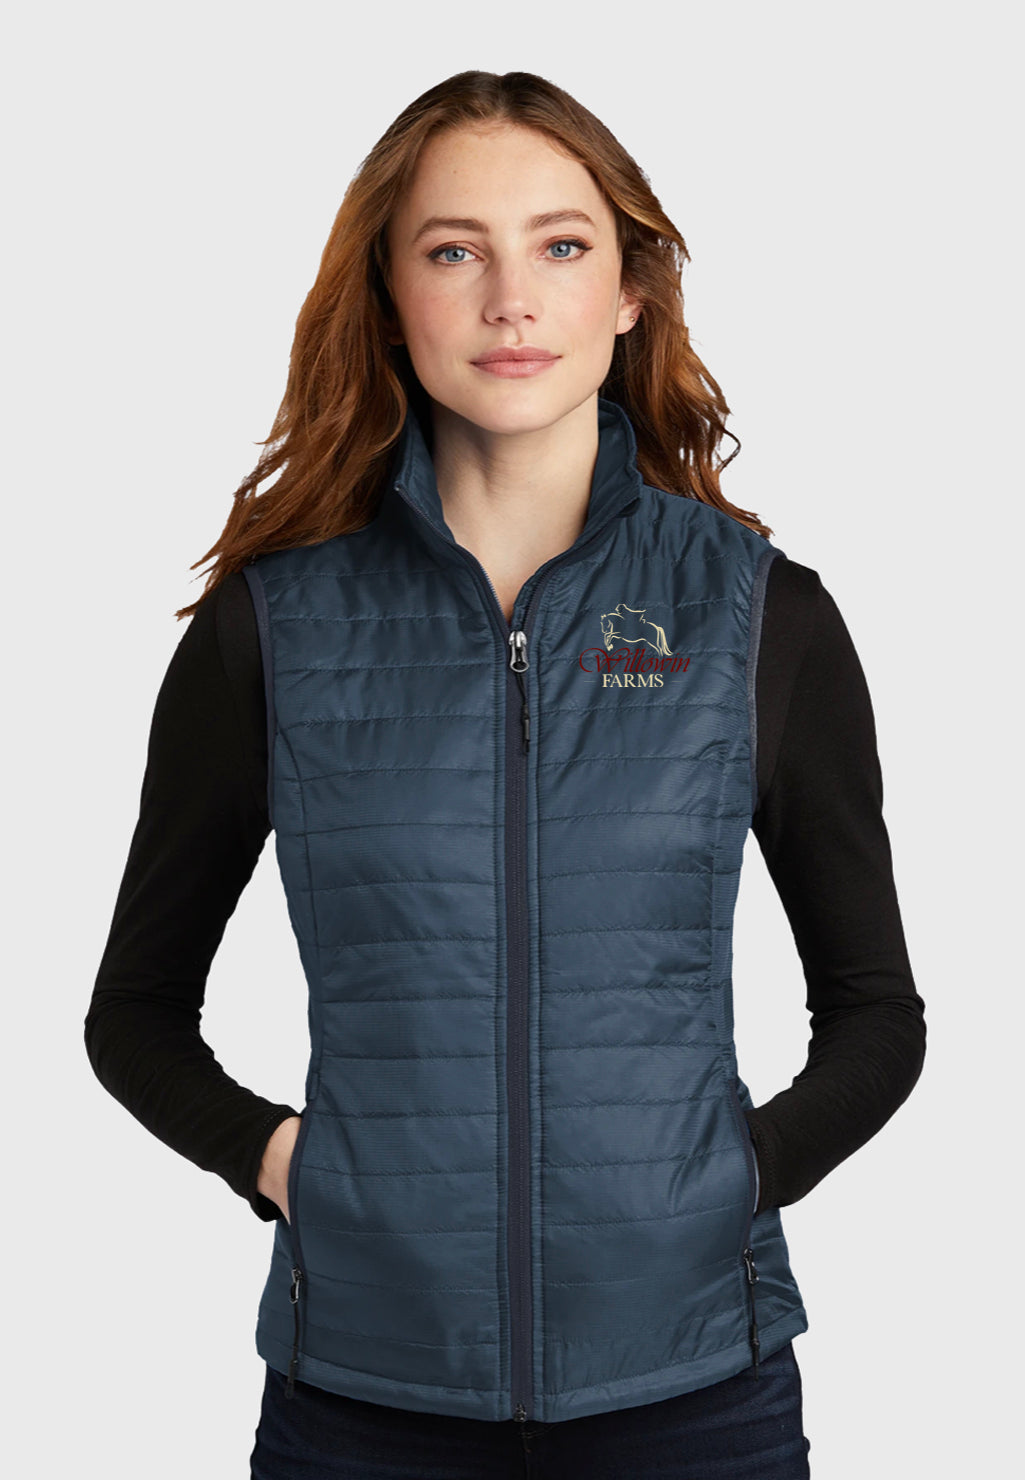 Willowin Farms Port Authority® Ladies Packable Down Vest - Navy